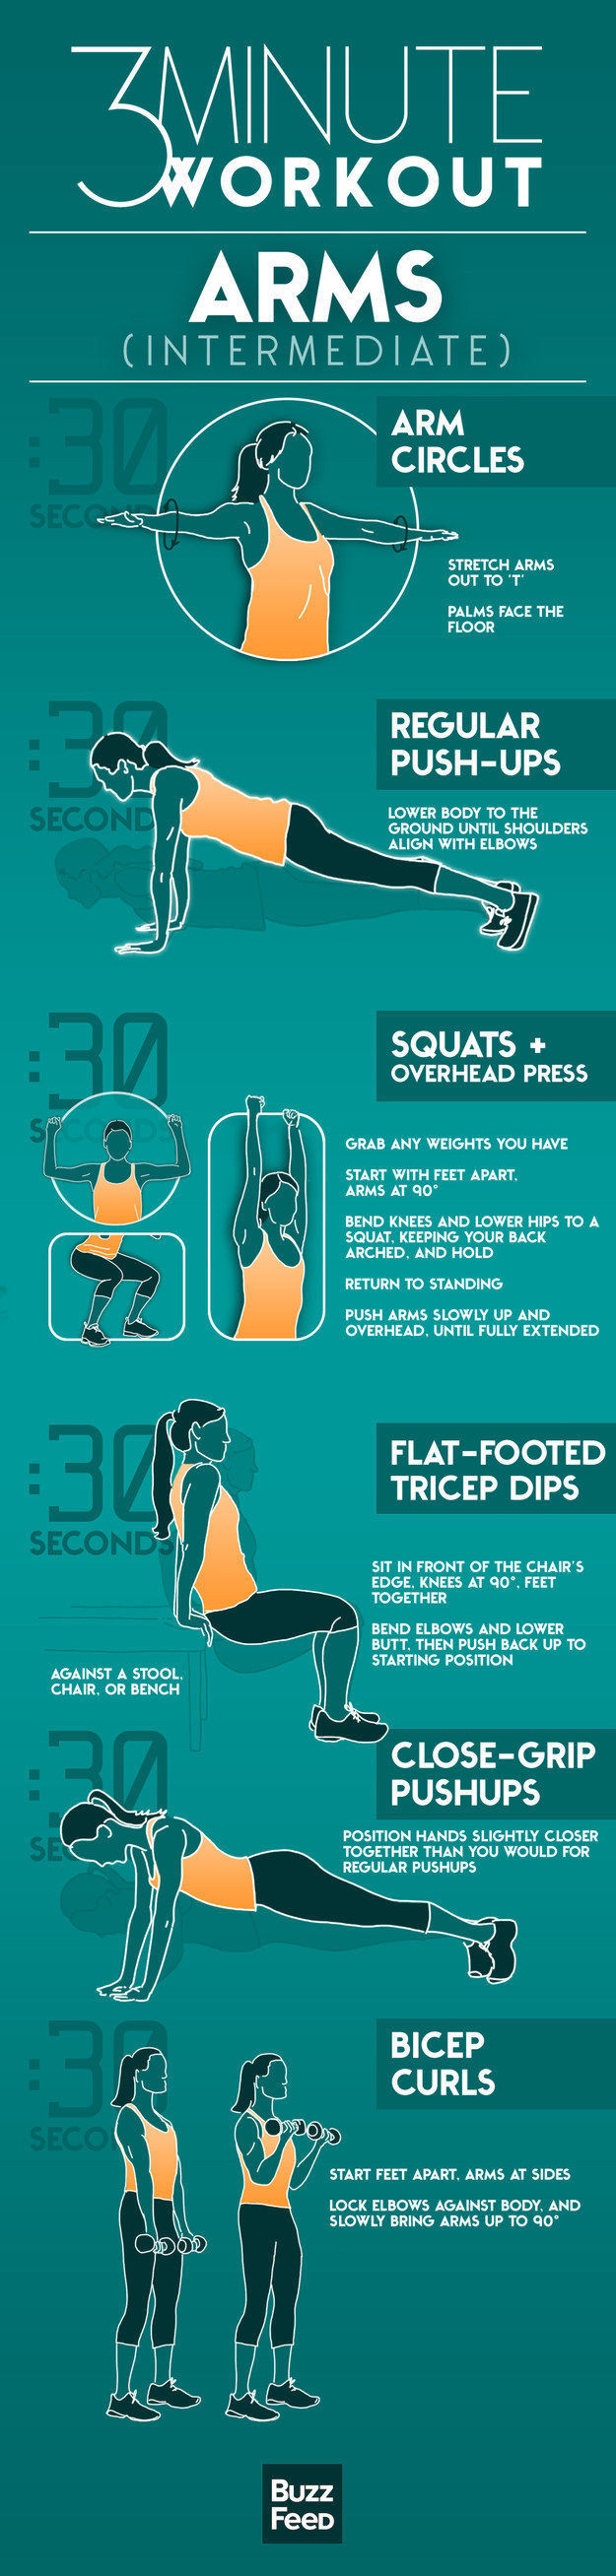 An Easy Three Minute Workout for Your Arms